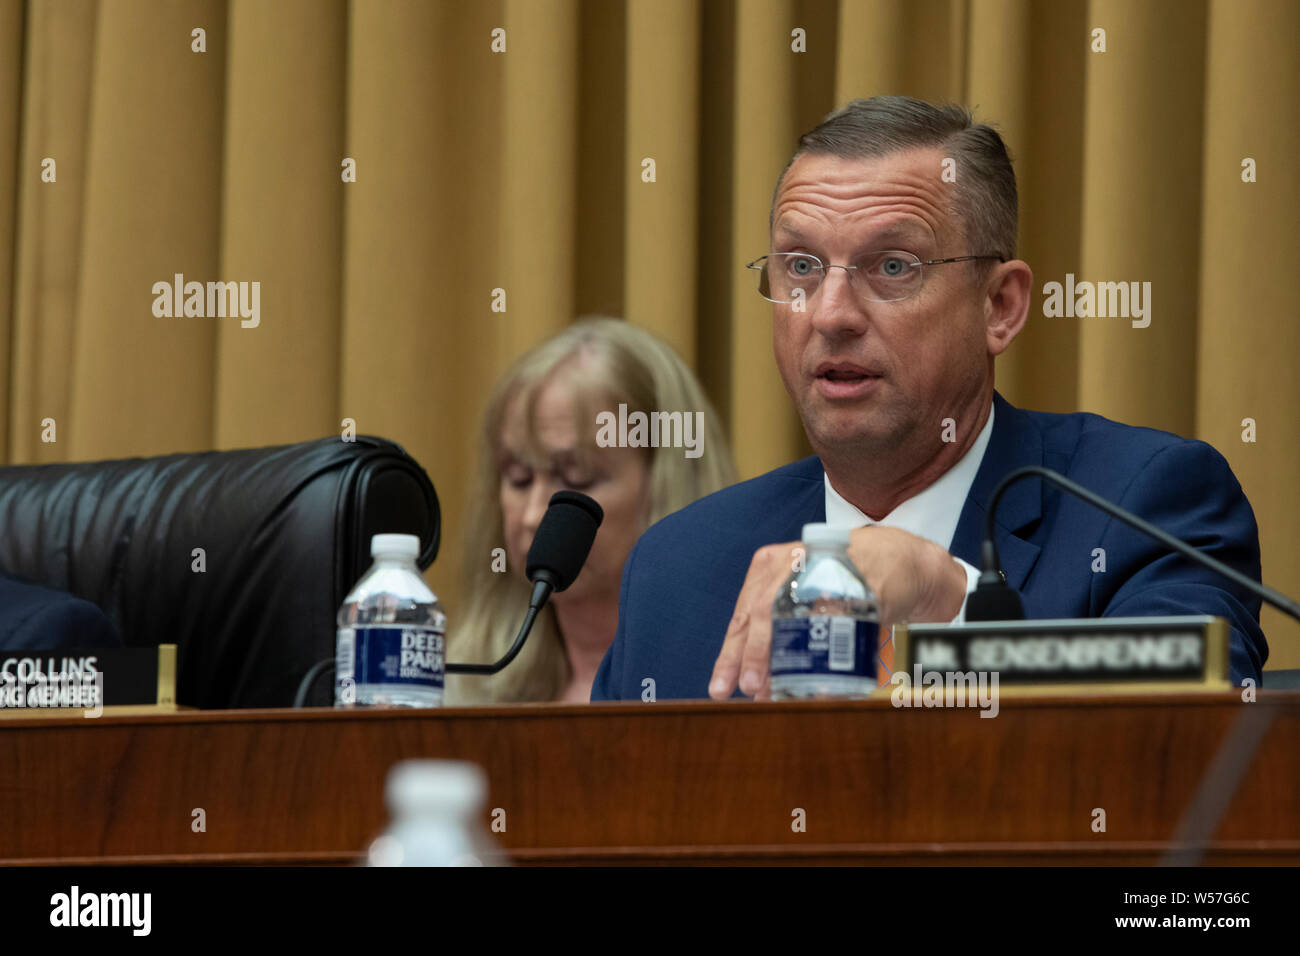 Rep. Doug Collins questions Chief of the U.S. Border Patrol Law Enforcement Division Brian Hastings during a Judiciary Committee Oversight hearing on Capitol Hill July 25, 2019 in Washington, D.C. The hearing focused on the family separation policy and short-term custody of children. Stock Photo